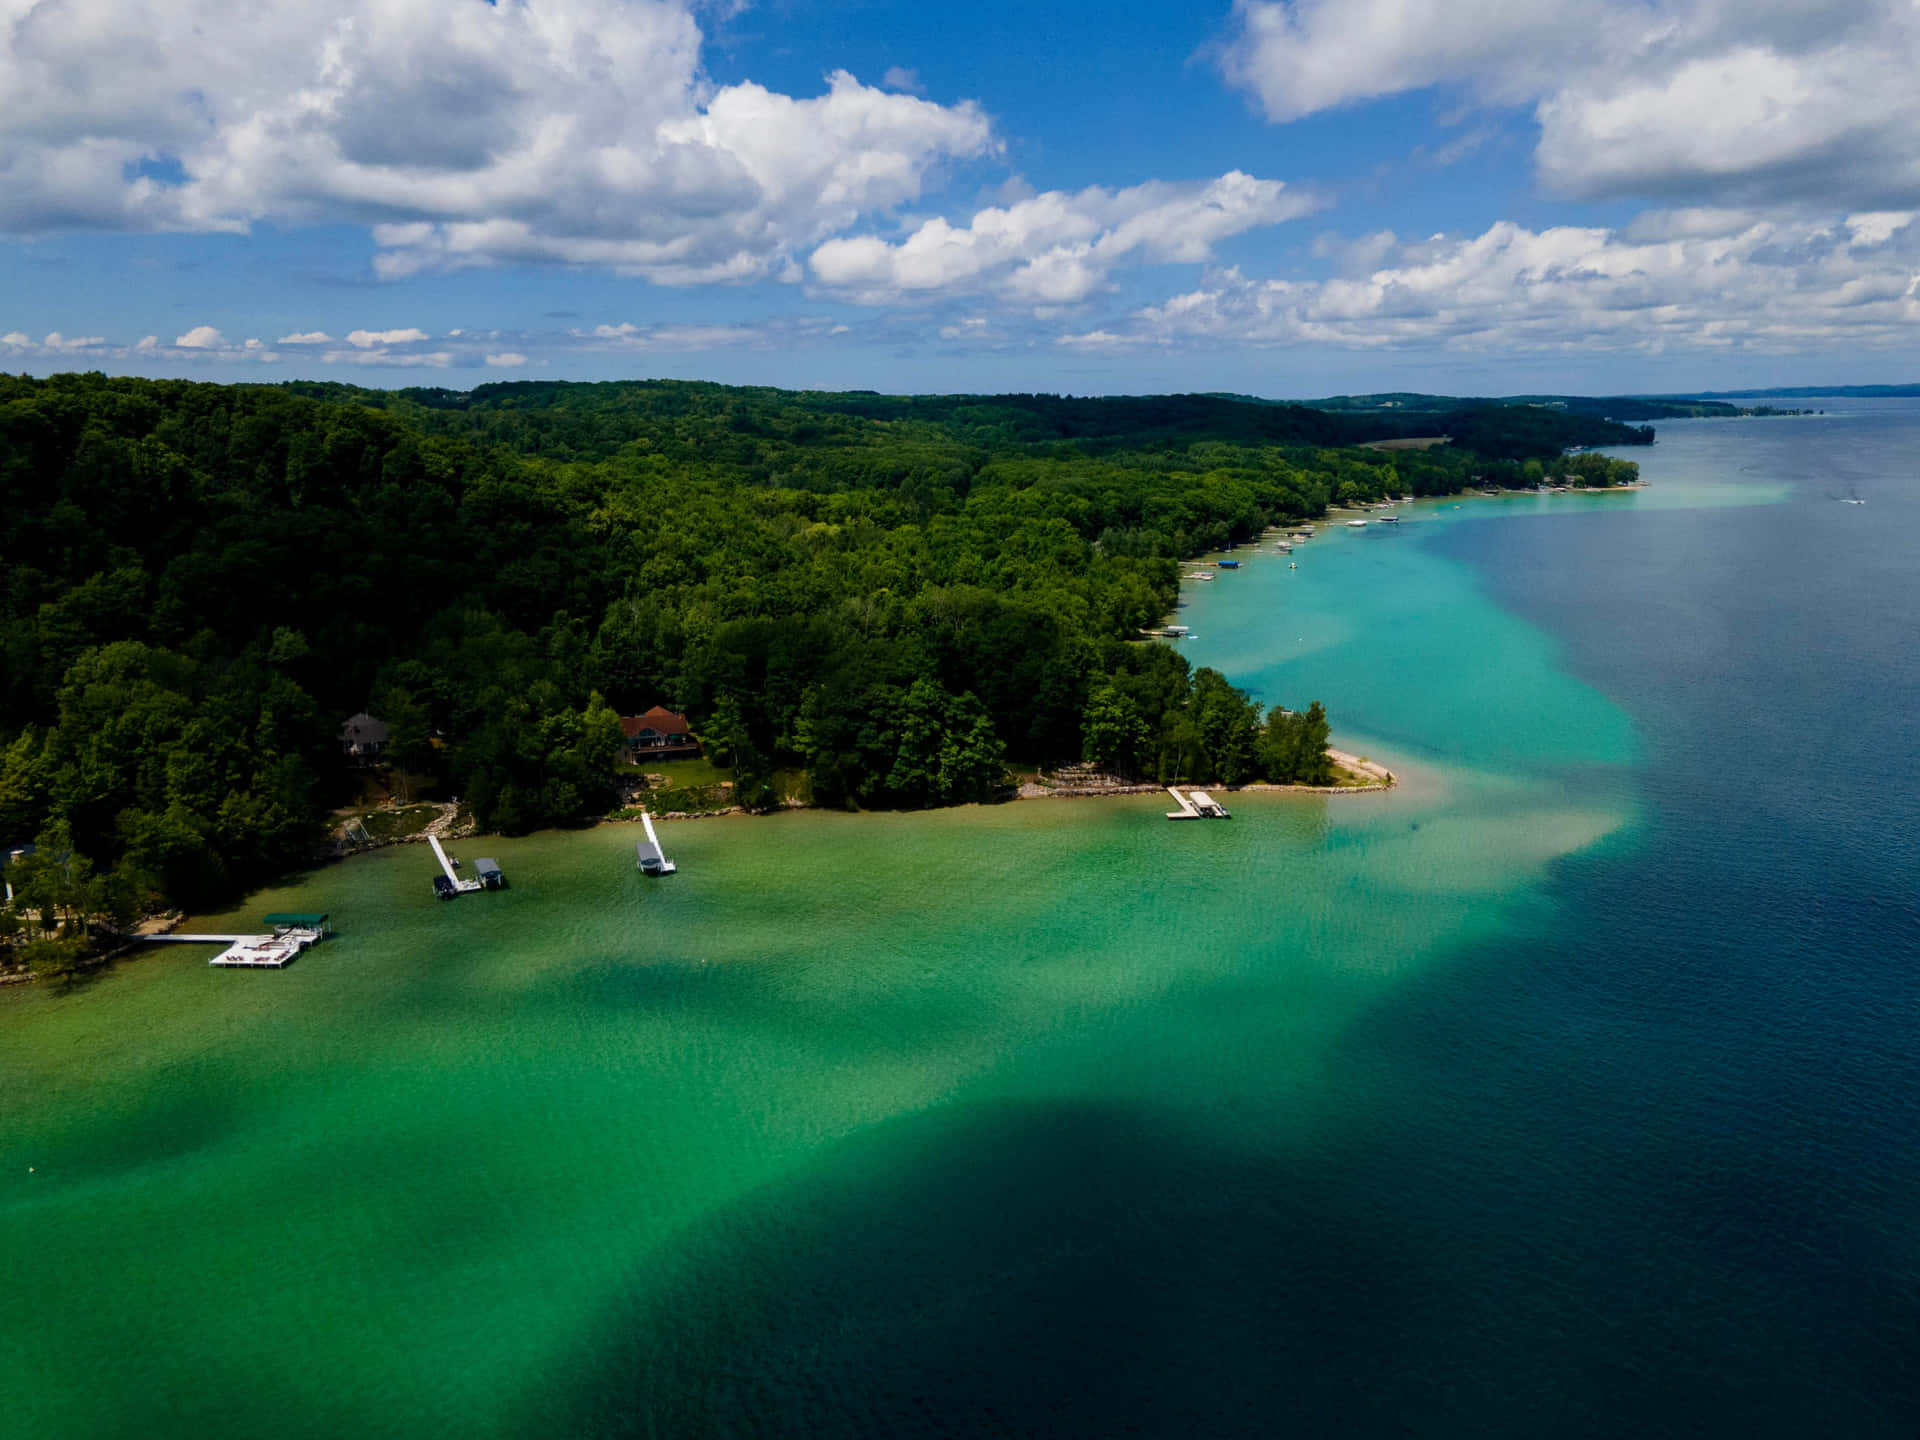 "A tranquil view of Torch Lake, Michigan"